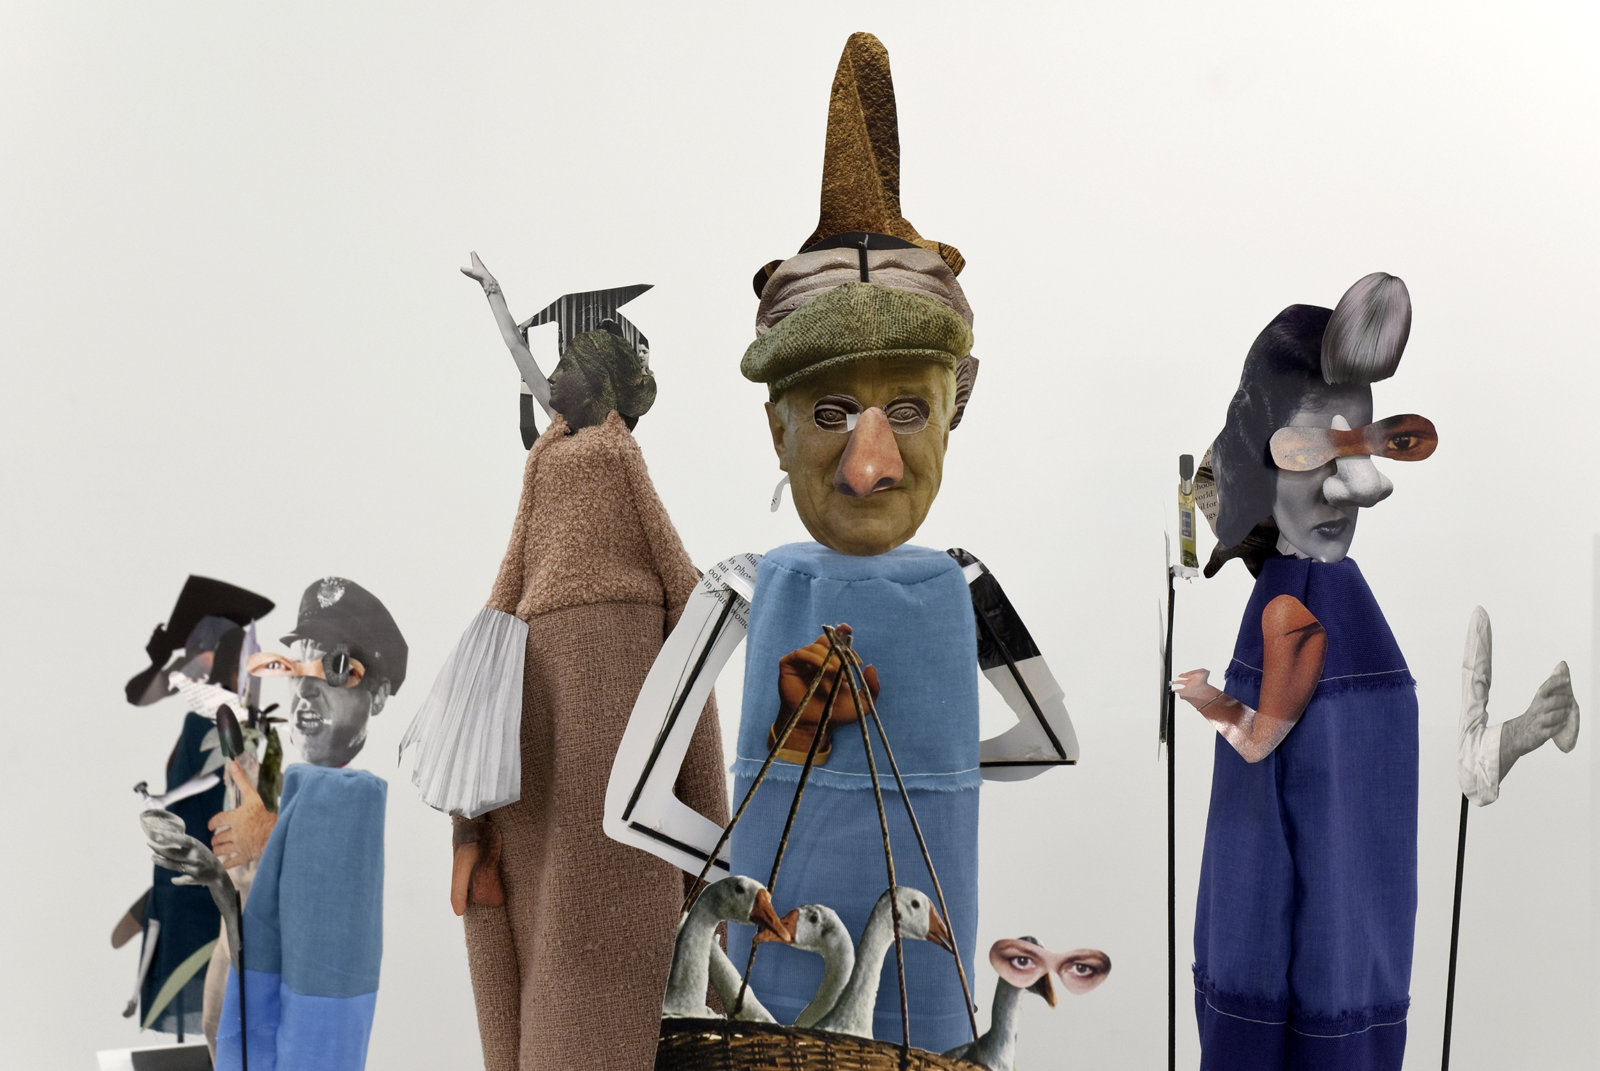 Geoffrey Farmer, The Surgeon and the Photographer (detail), 2009, paper, textile, wood, metal, 365 figures, each figure approximately: 18 x 5 x 5 in. (45 x 13 x 13 cm)